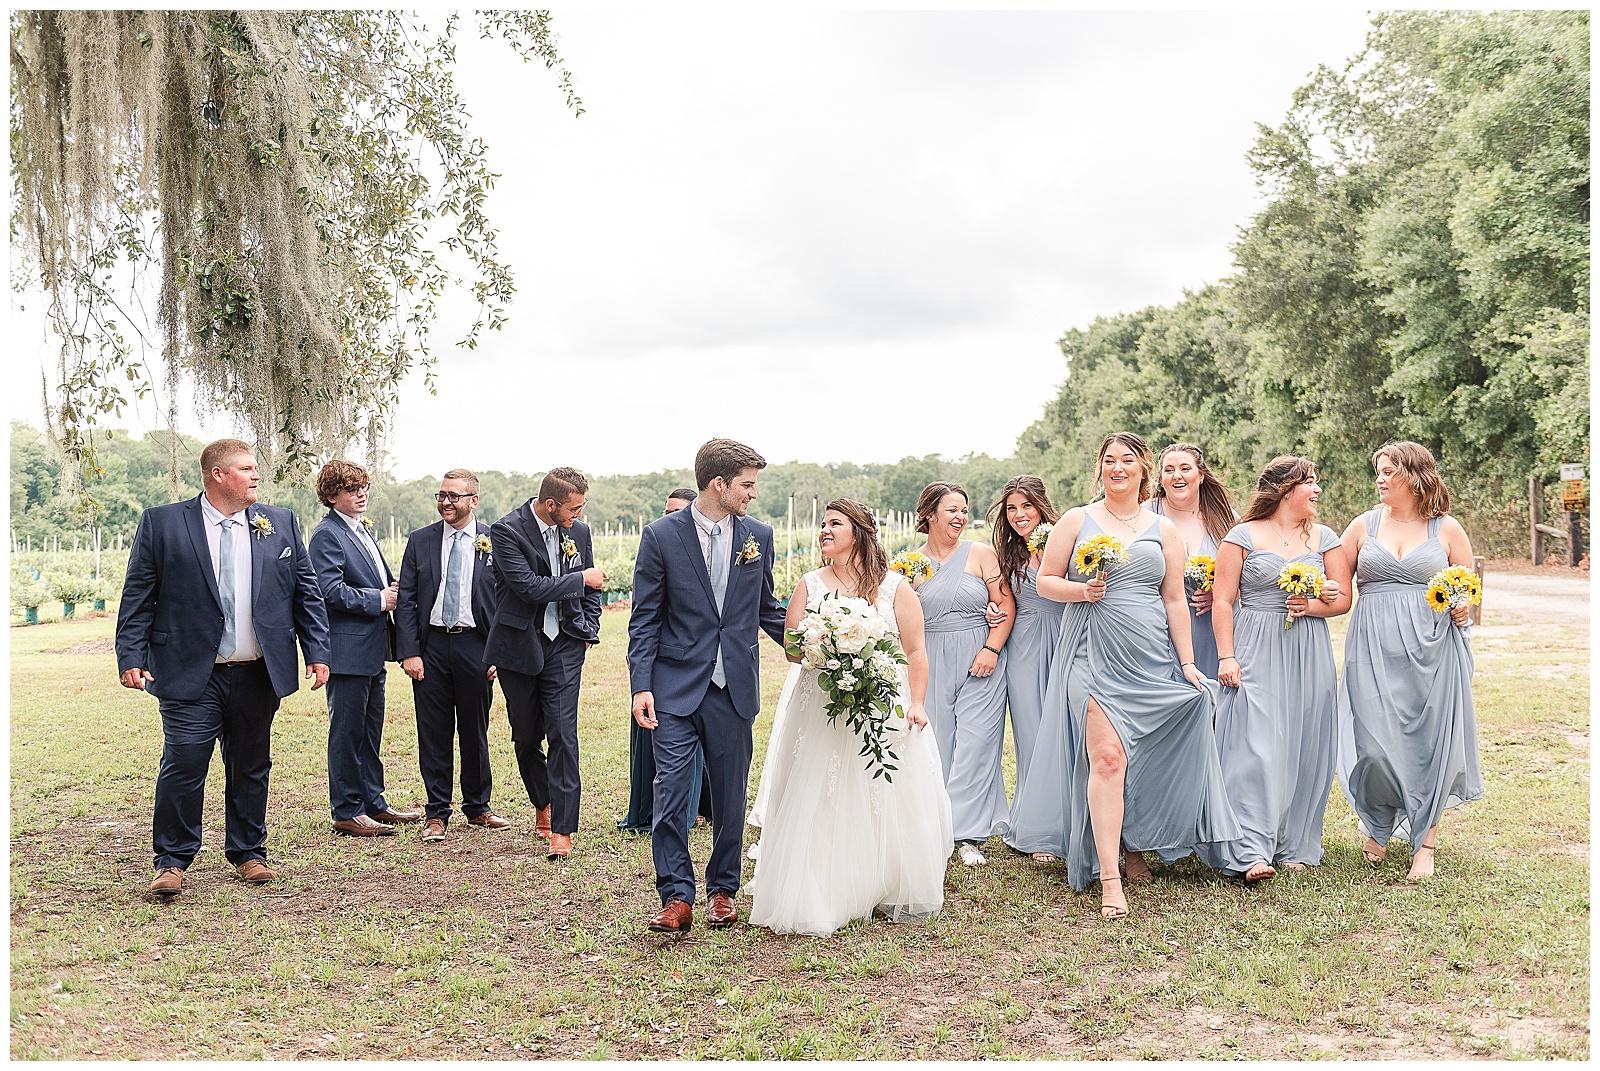 The Bridal party walking toward the camera laughing at one another 